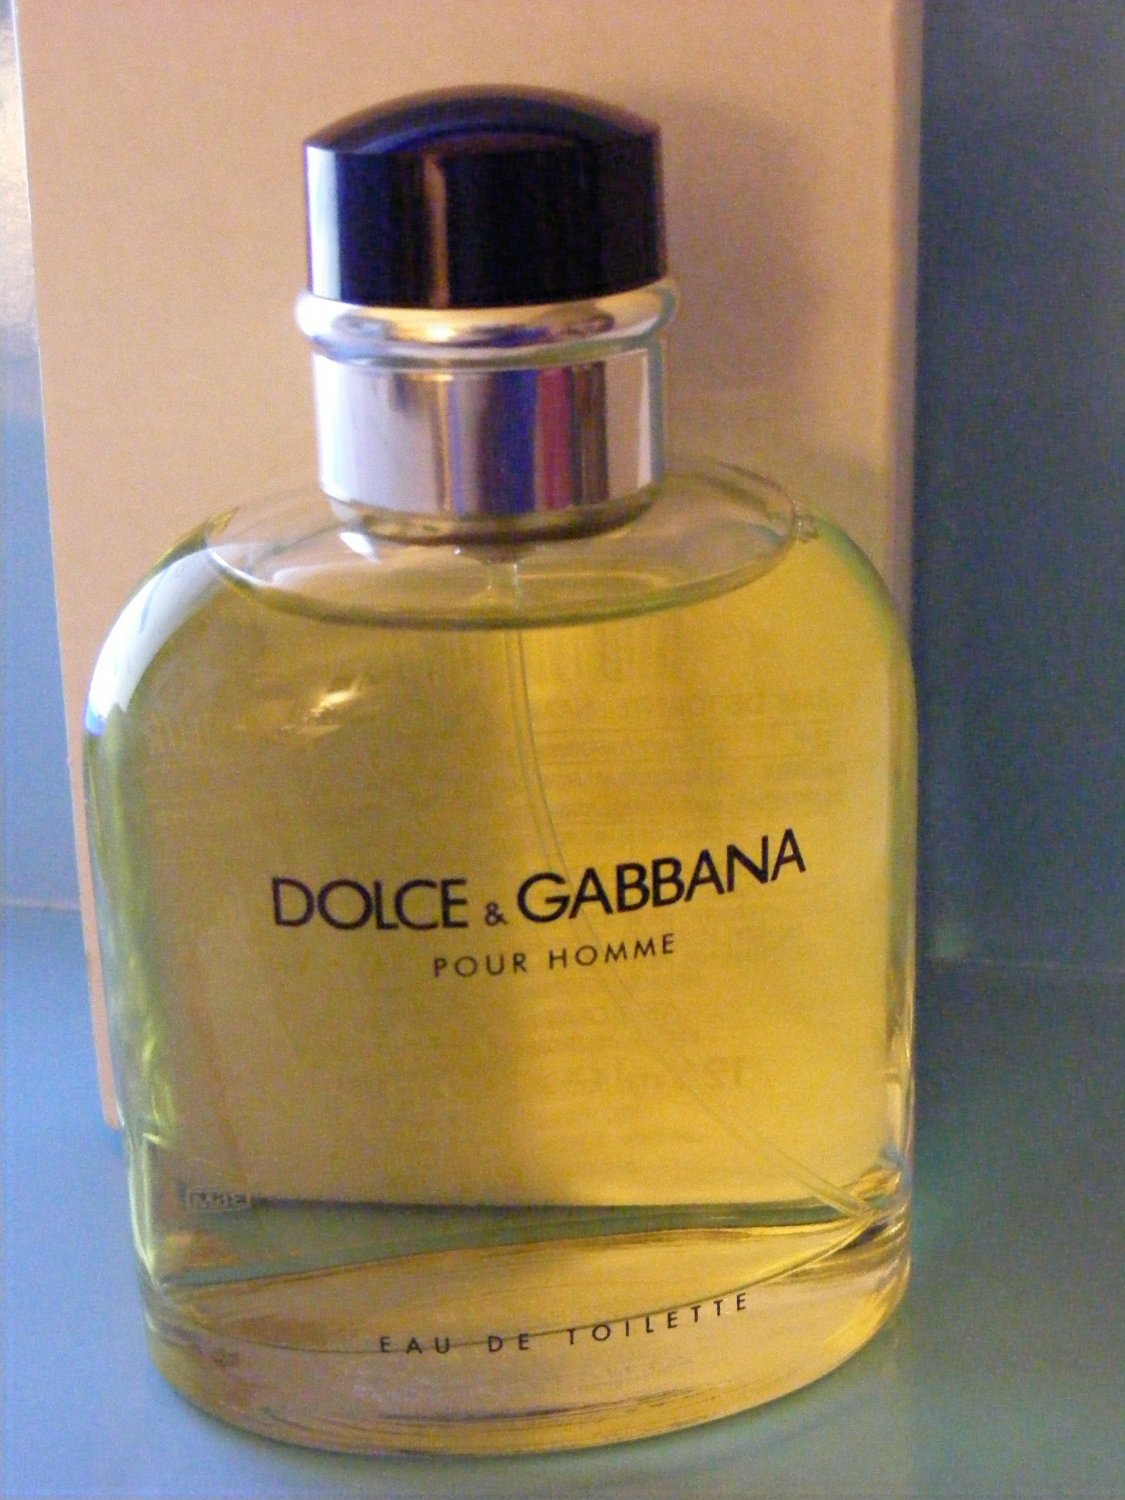 Dolce gabbana forever pour homme. Dolce Gabbana pour homme. Dolce Gabbana pour homme мужские. Dolce Gabbana pour homme 3. Дольче Габбана Cologne.